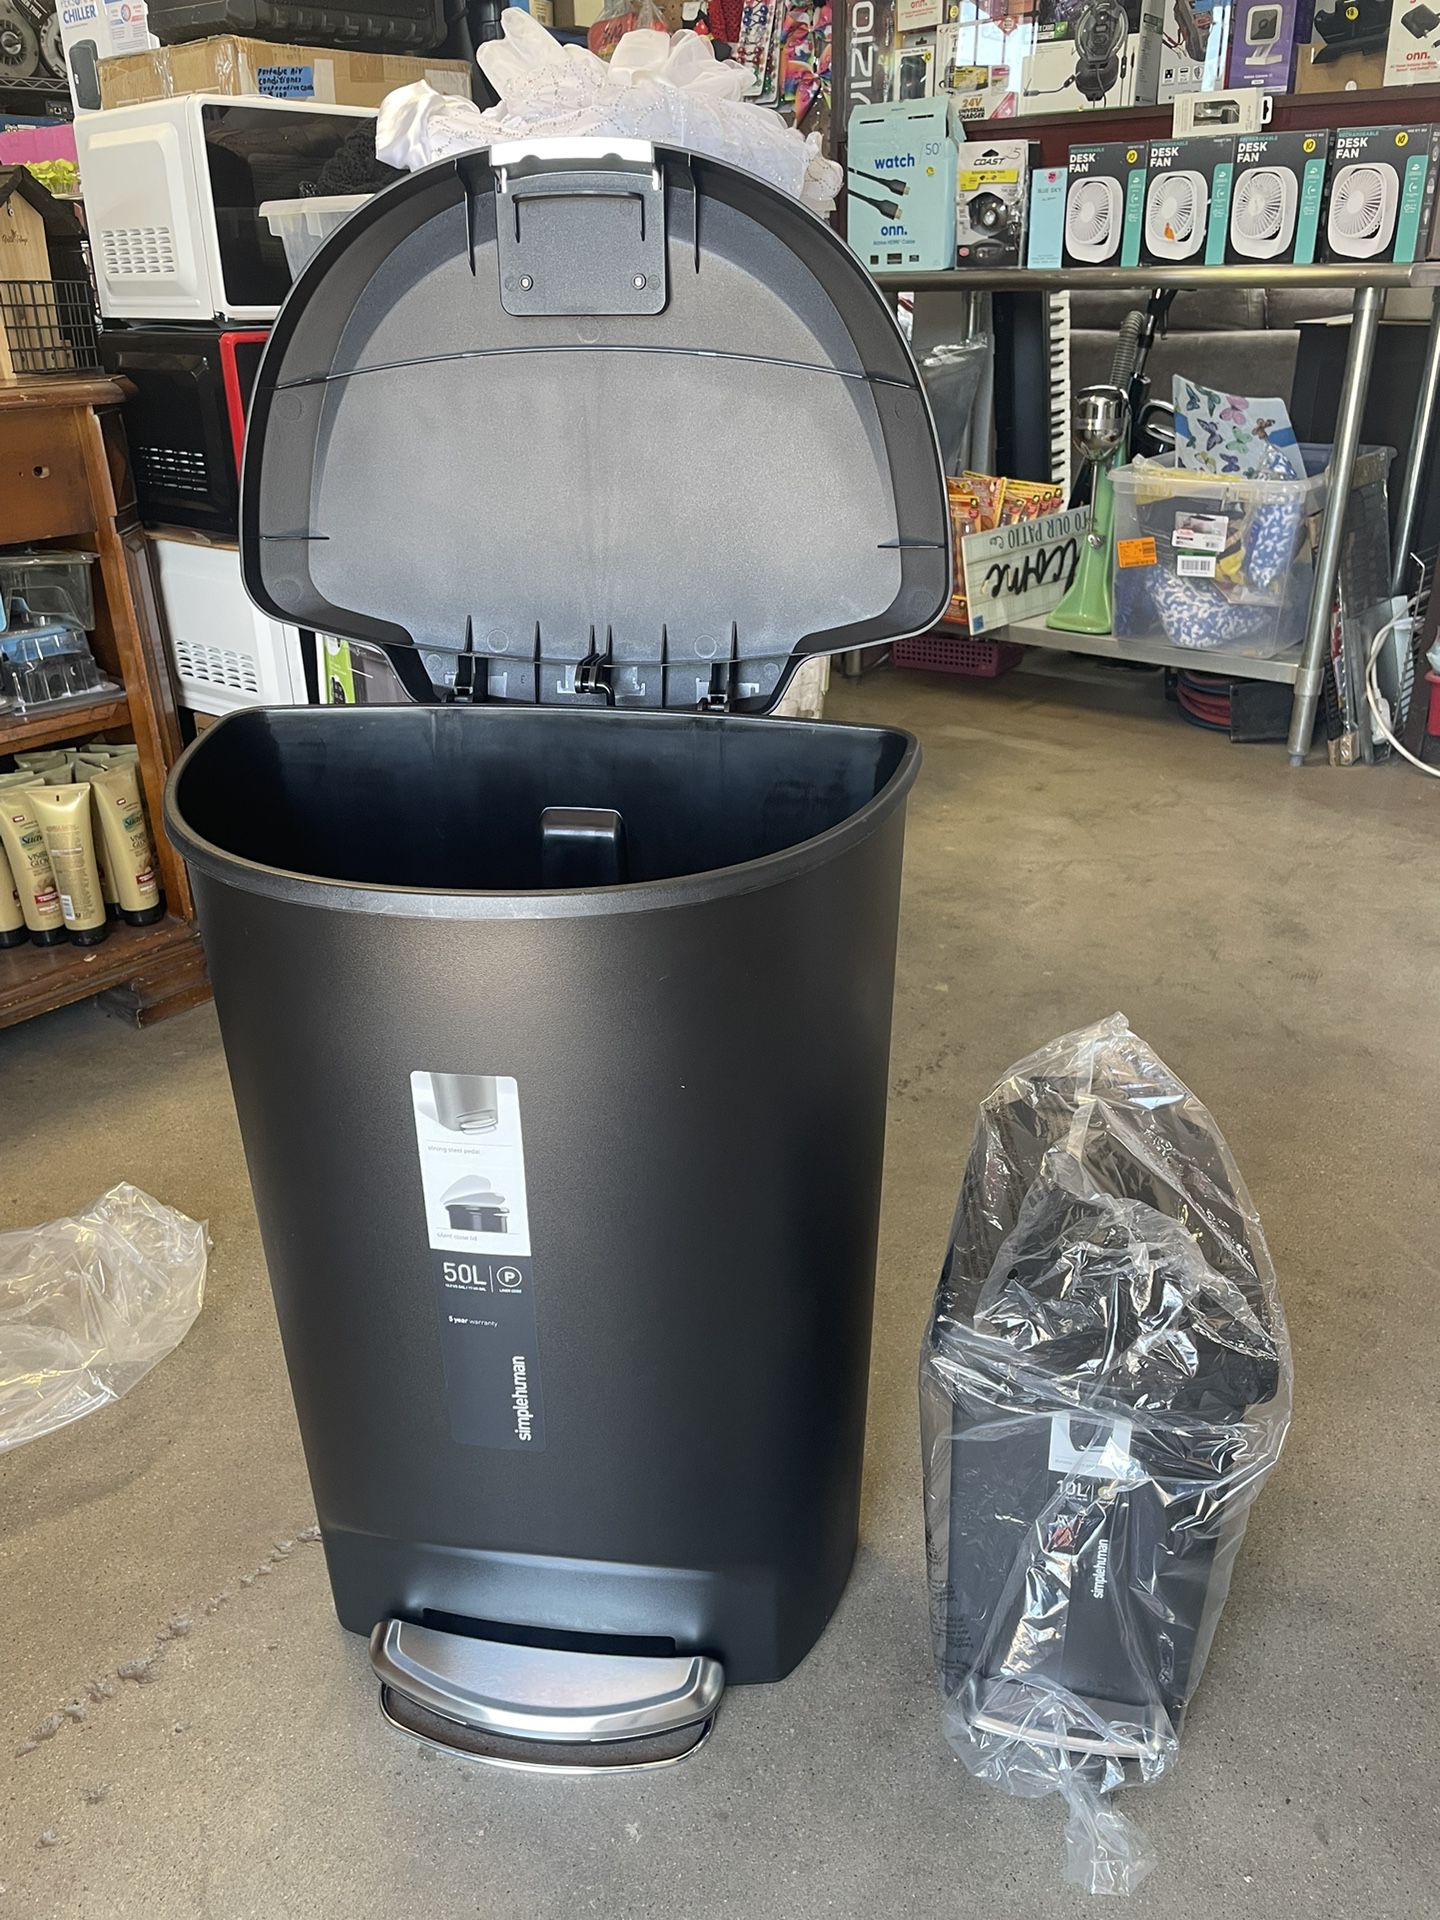 50 L Step-On Plastic Trash Can with Lid-Lock and Free 10 L Slim Black Plastic Can / Bote de basura